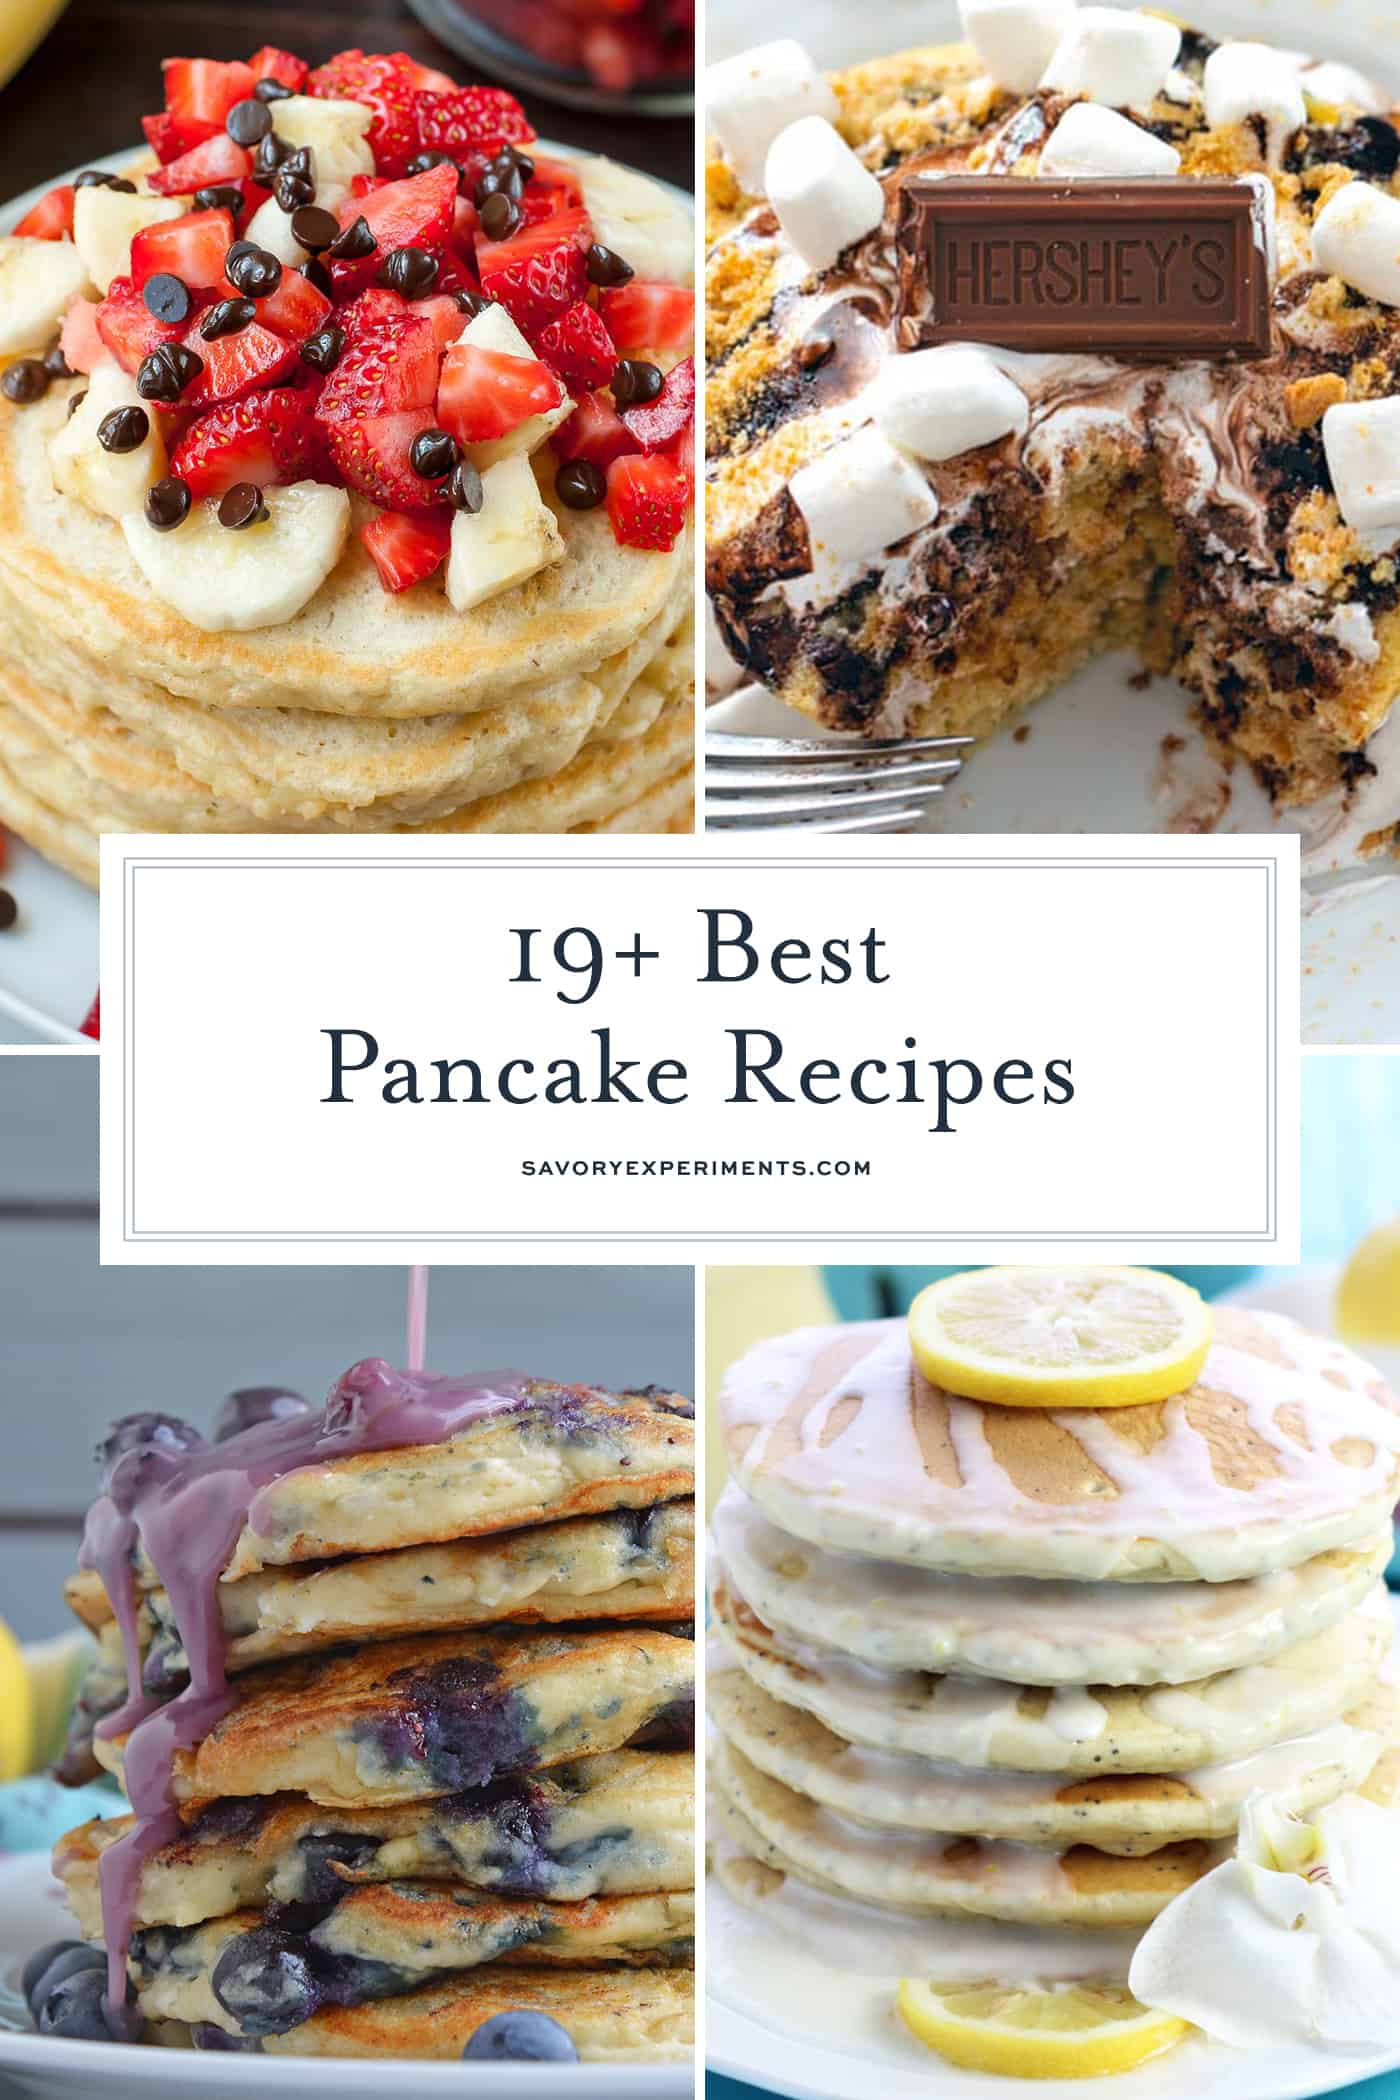 21+ Recipes for National Pancake Day Story